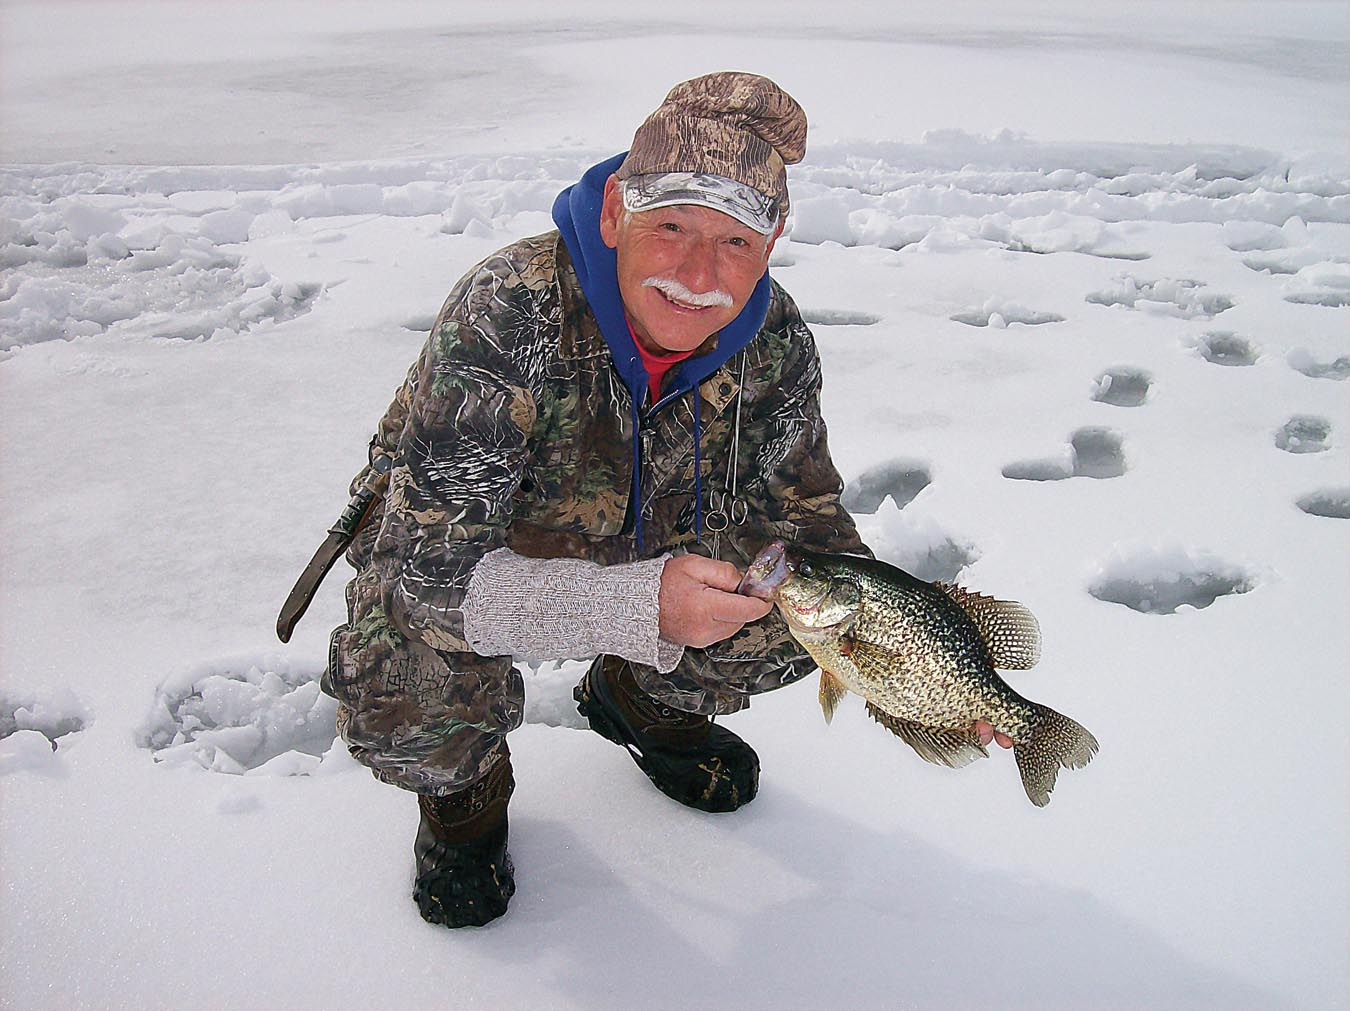 Step onto the ice and catch tonight's dinner - Backwoods Home Magazine